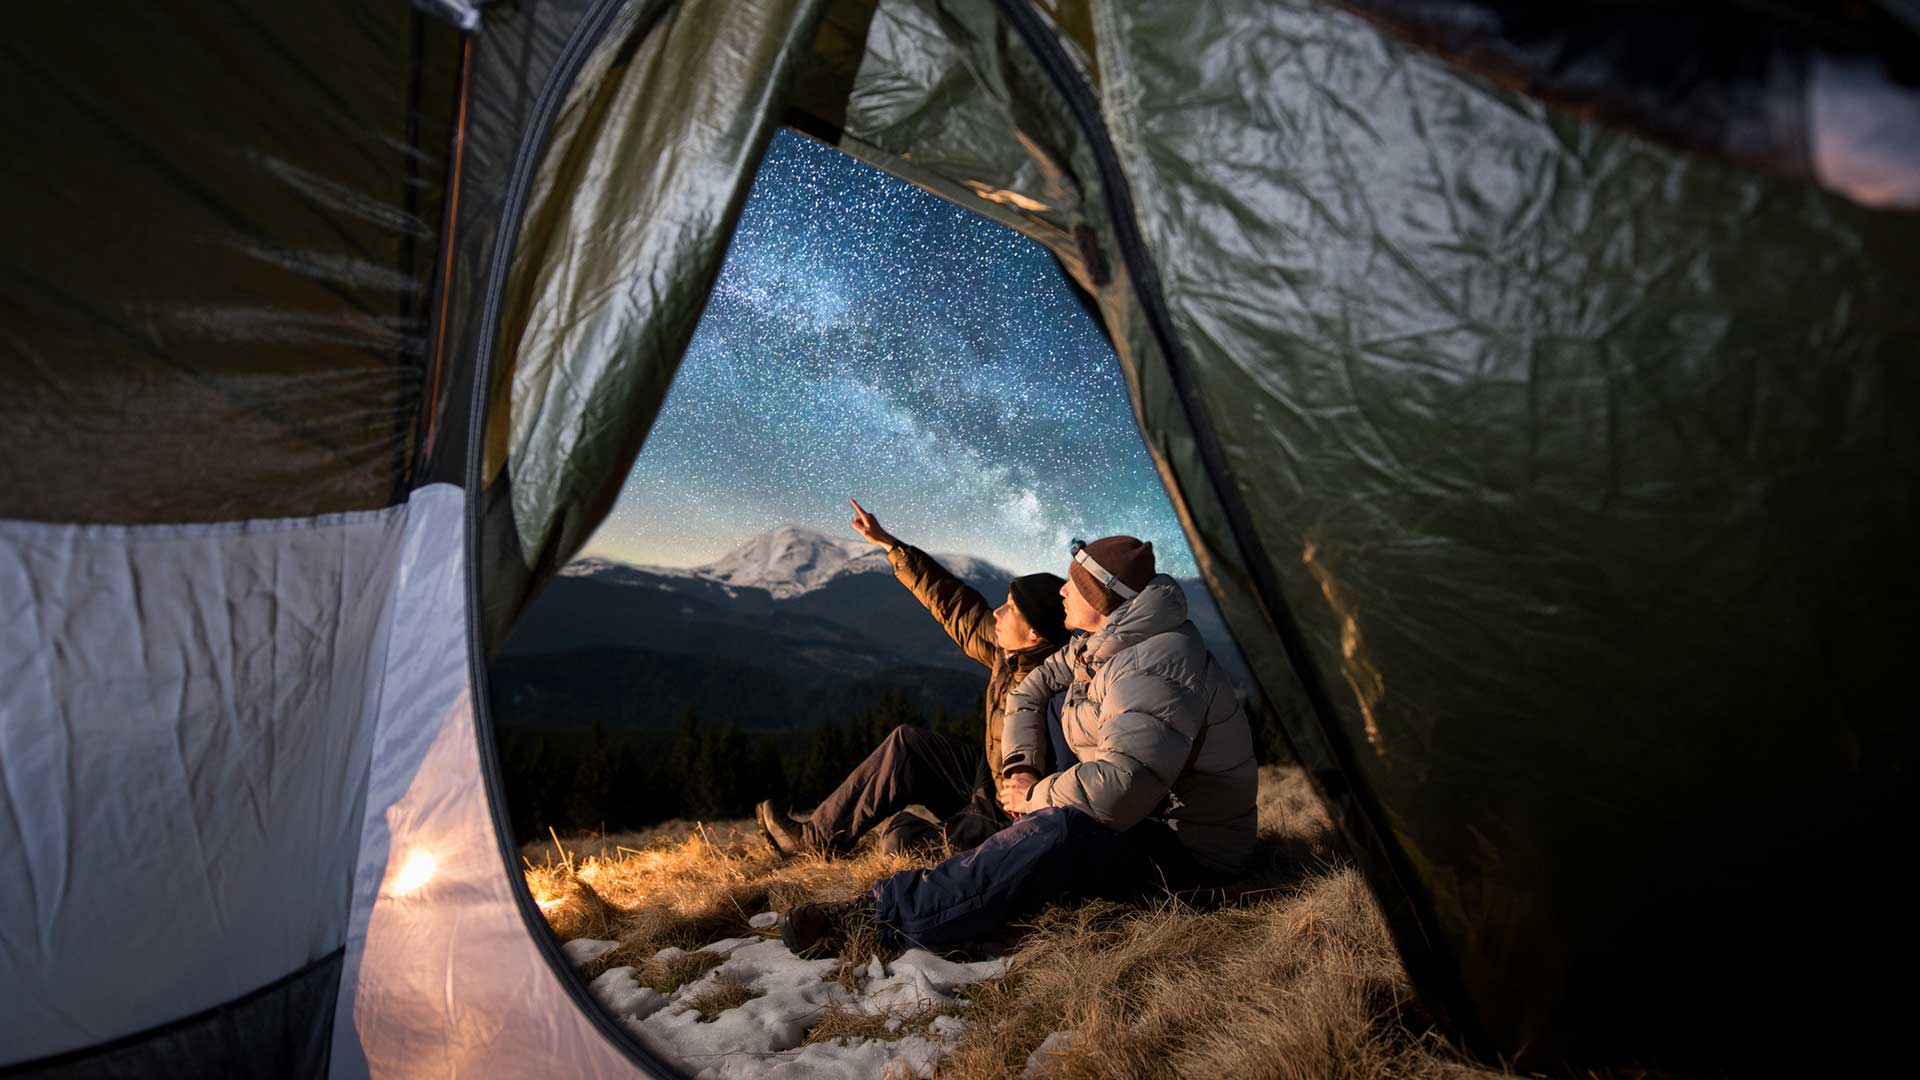 People camping under the night sky